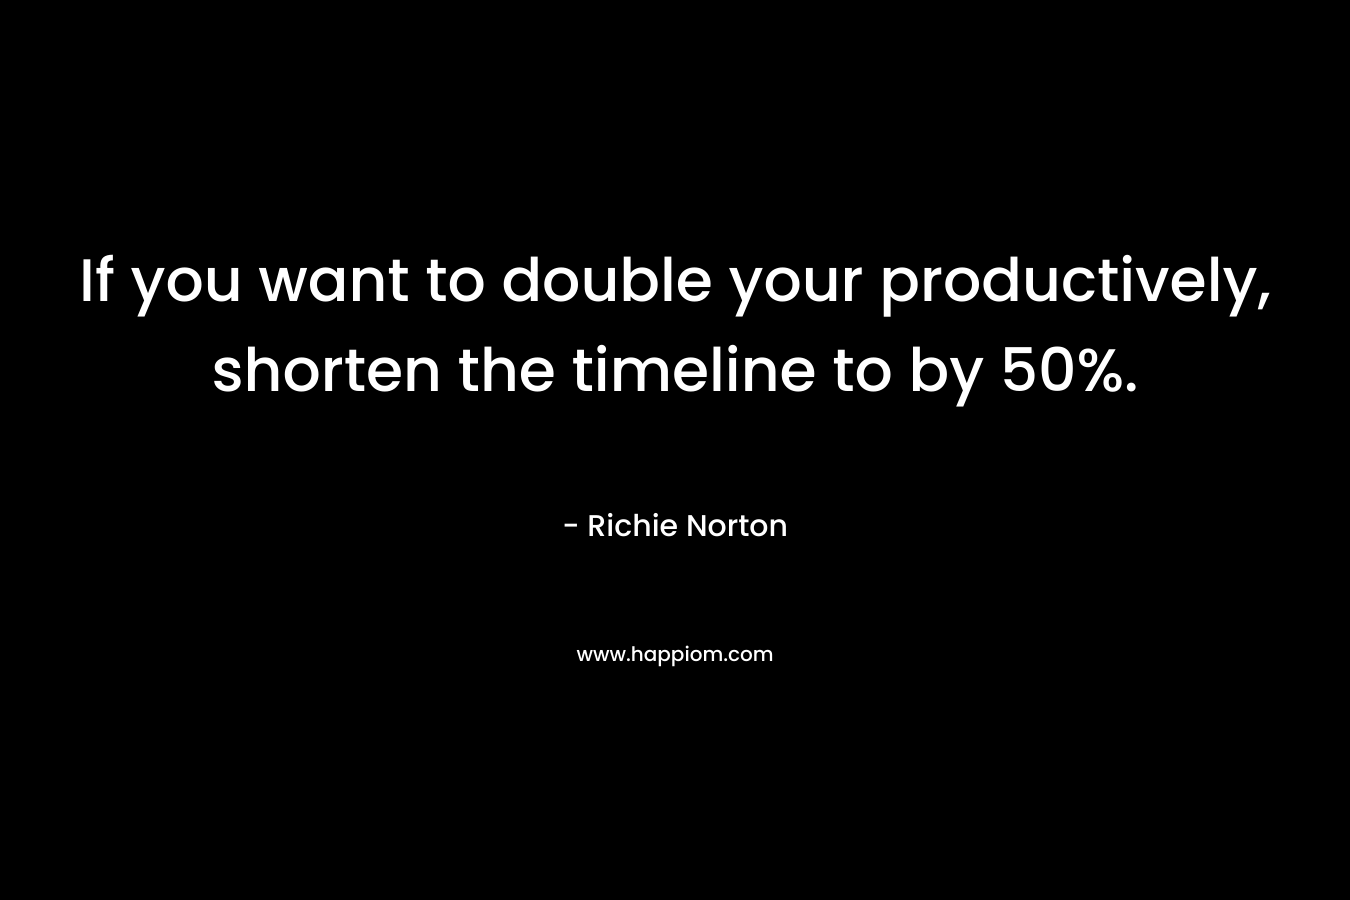 If you want to double your productively, shorten the timeline to by 50%.